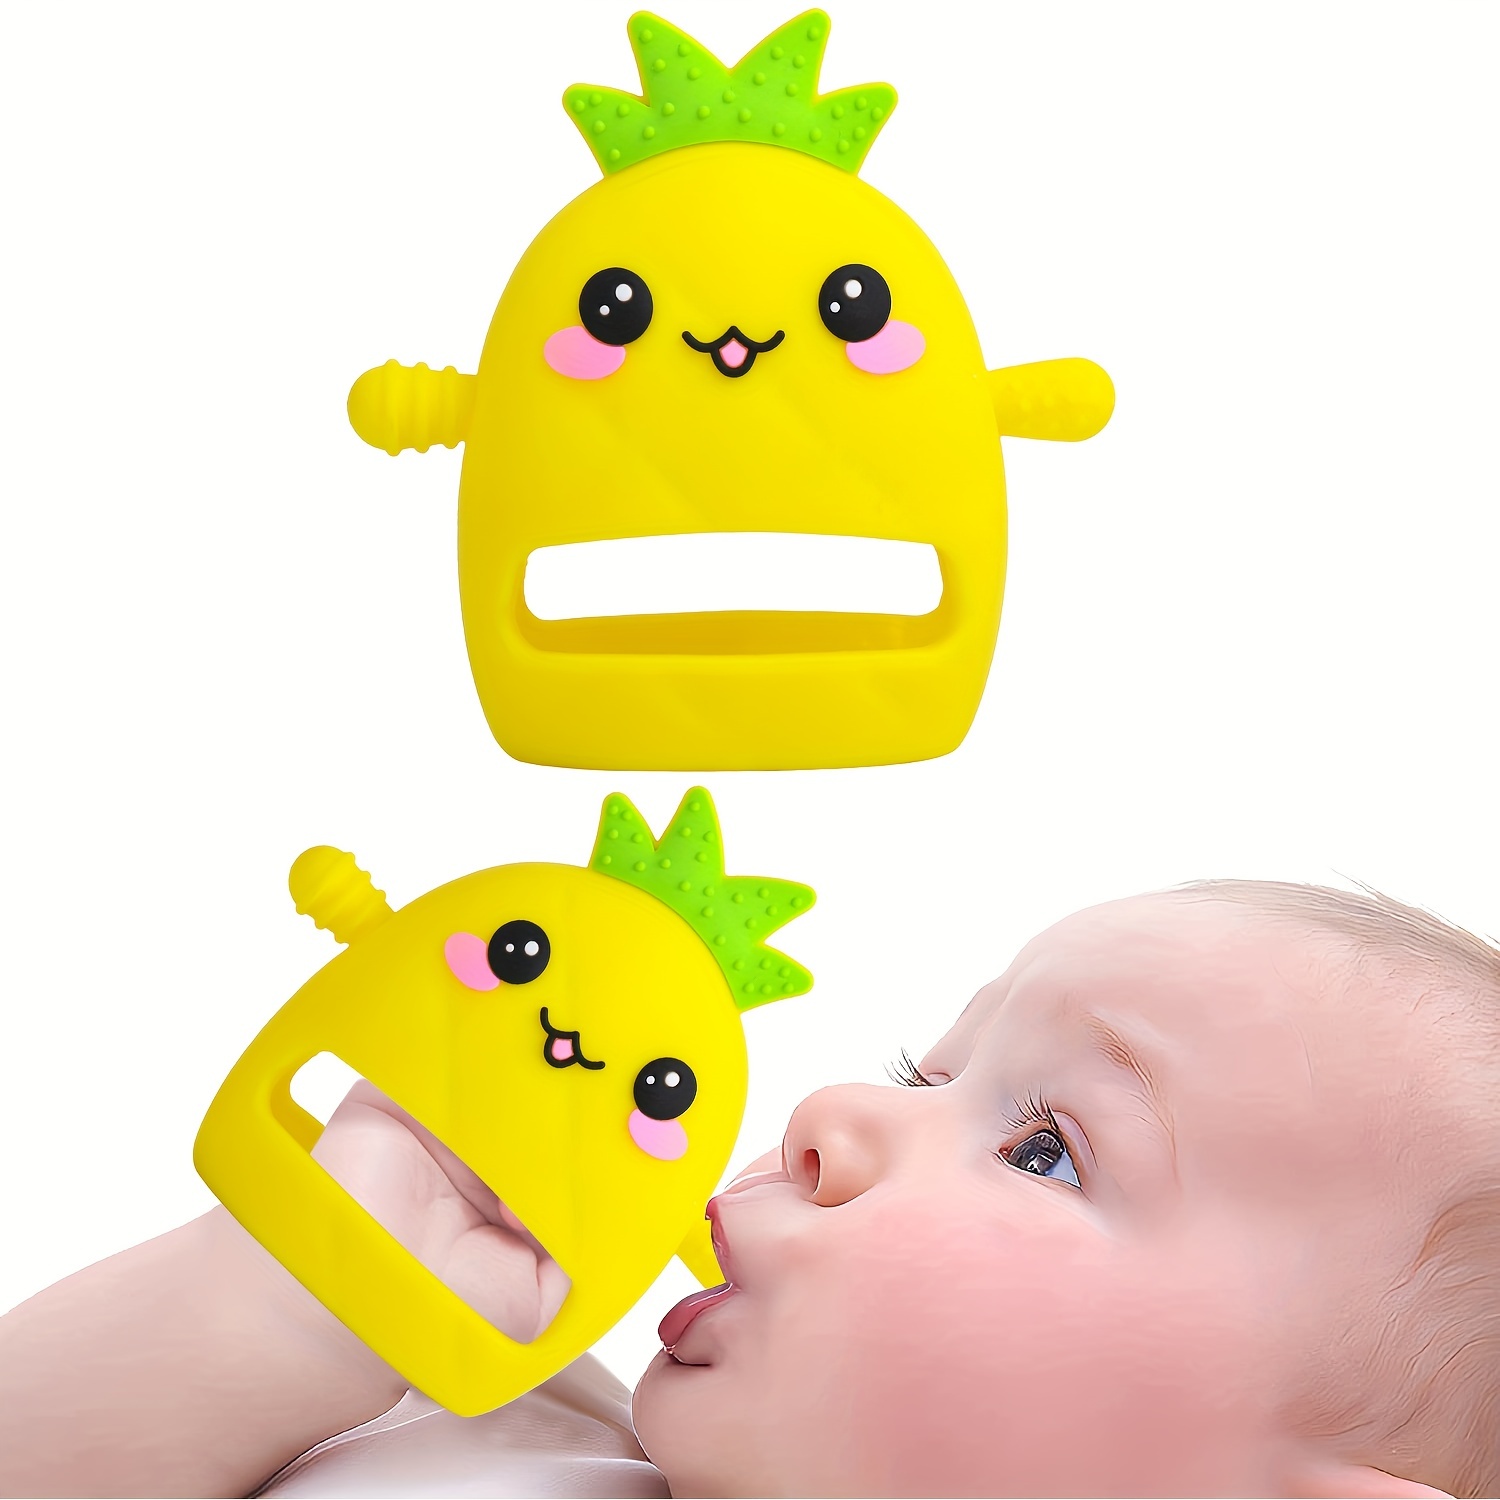 Baby Teething Toys- Teething Toys for Babies 0-6 Months& 6-12 Months, Baby  Teether Chew Toys/Infant/ Baby Toys, Natural Organic Freezer Safe for  Infants and Toddlers, Baby Gift Set 